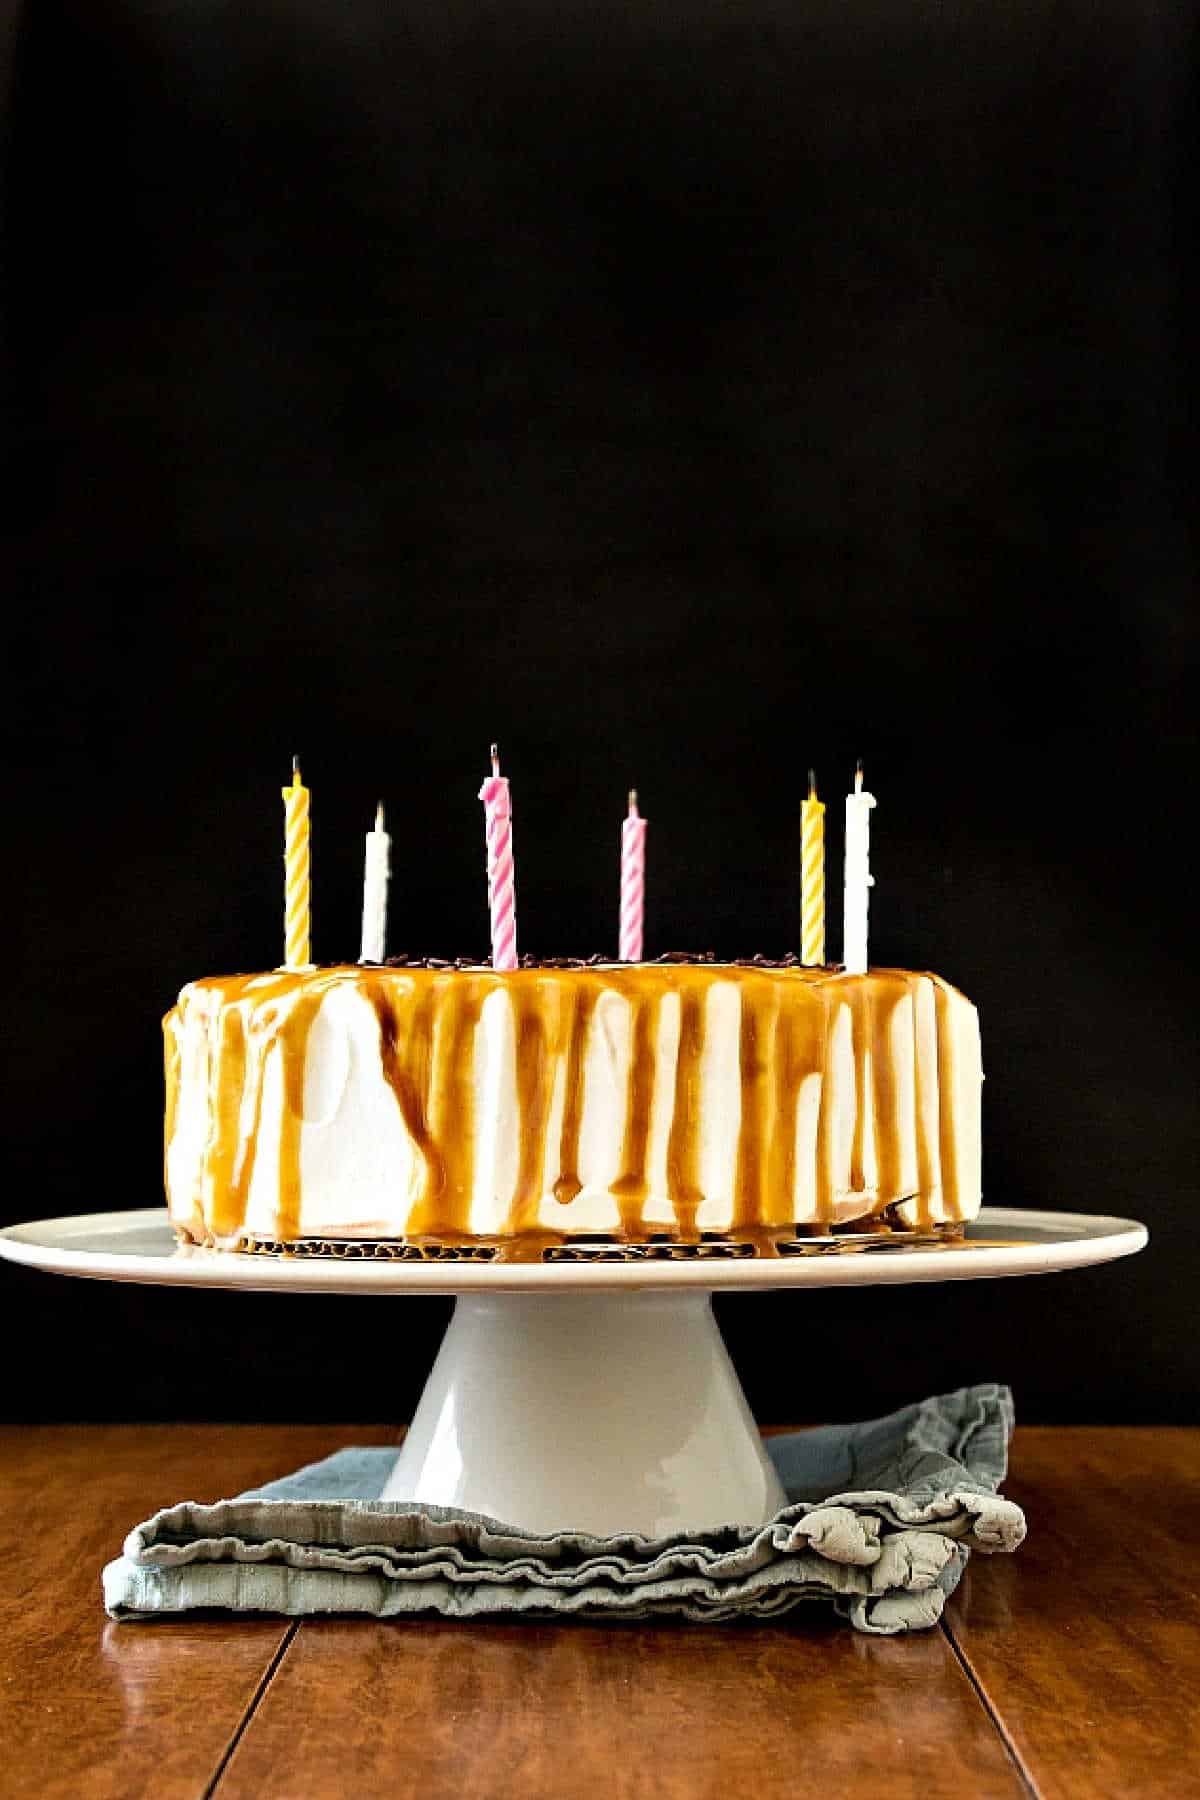 An ice cream cake with birthday candles in it.